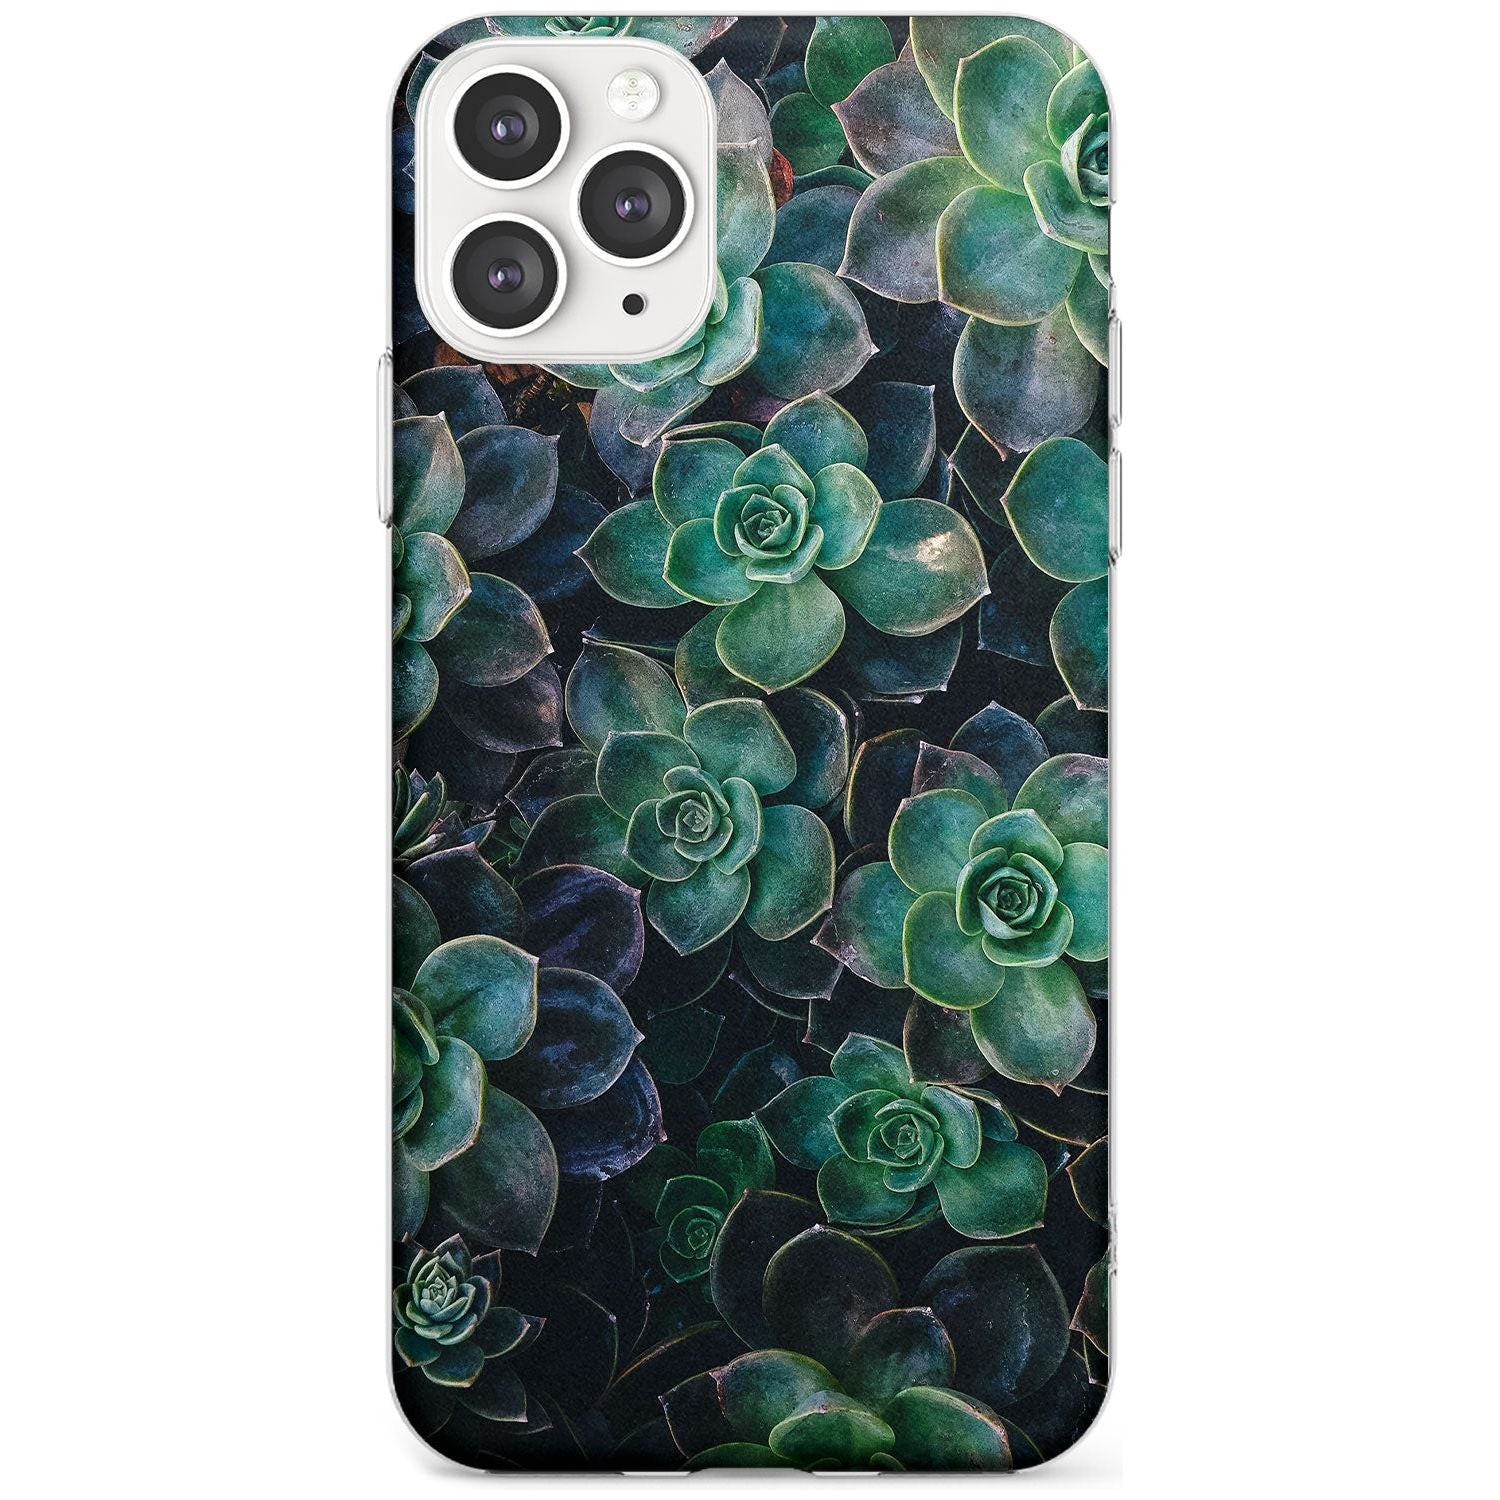 Succulents - Real Botanical Photographs Slim TPU Phone Case for iPhone 11 Pro Max